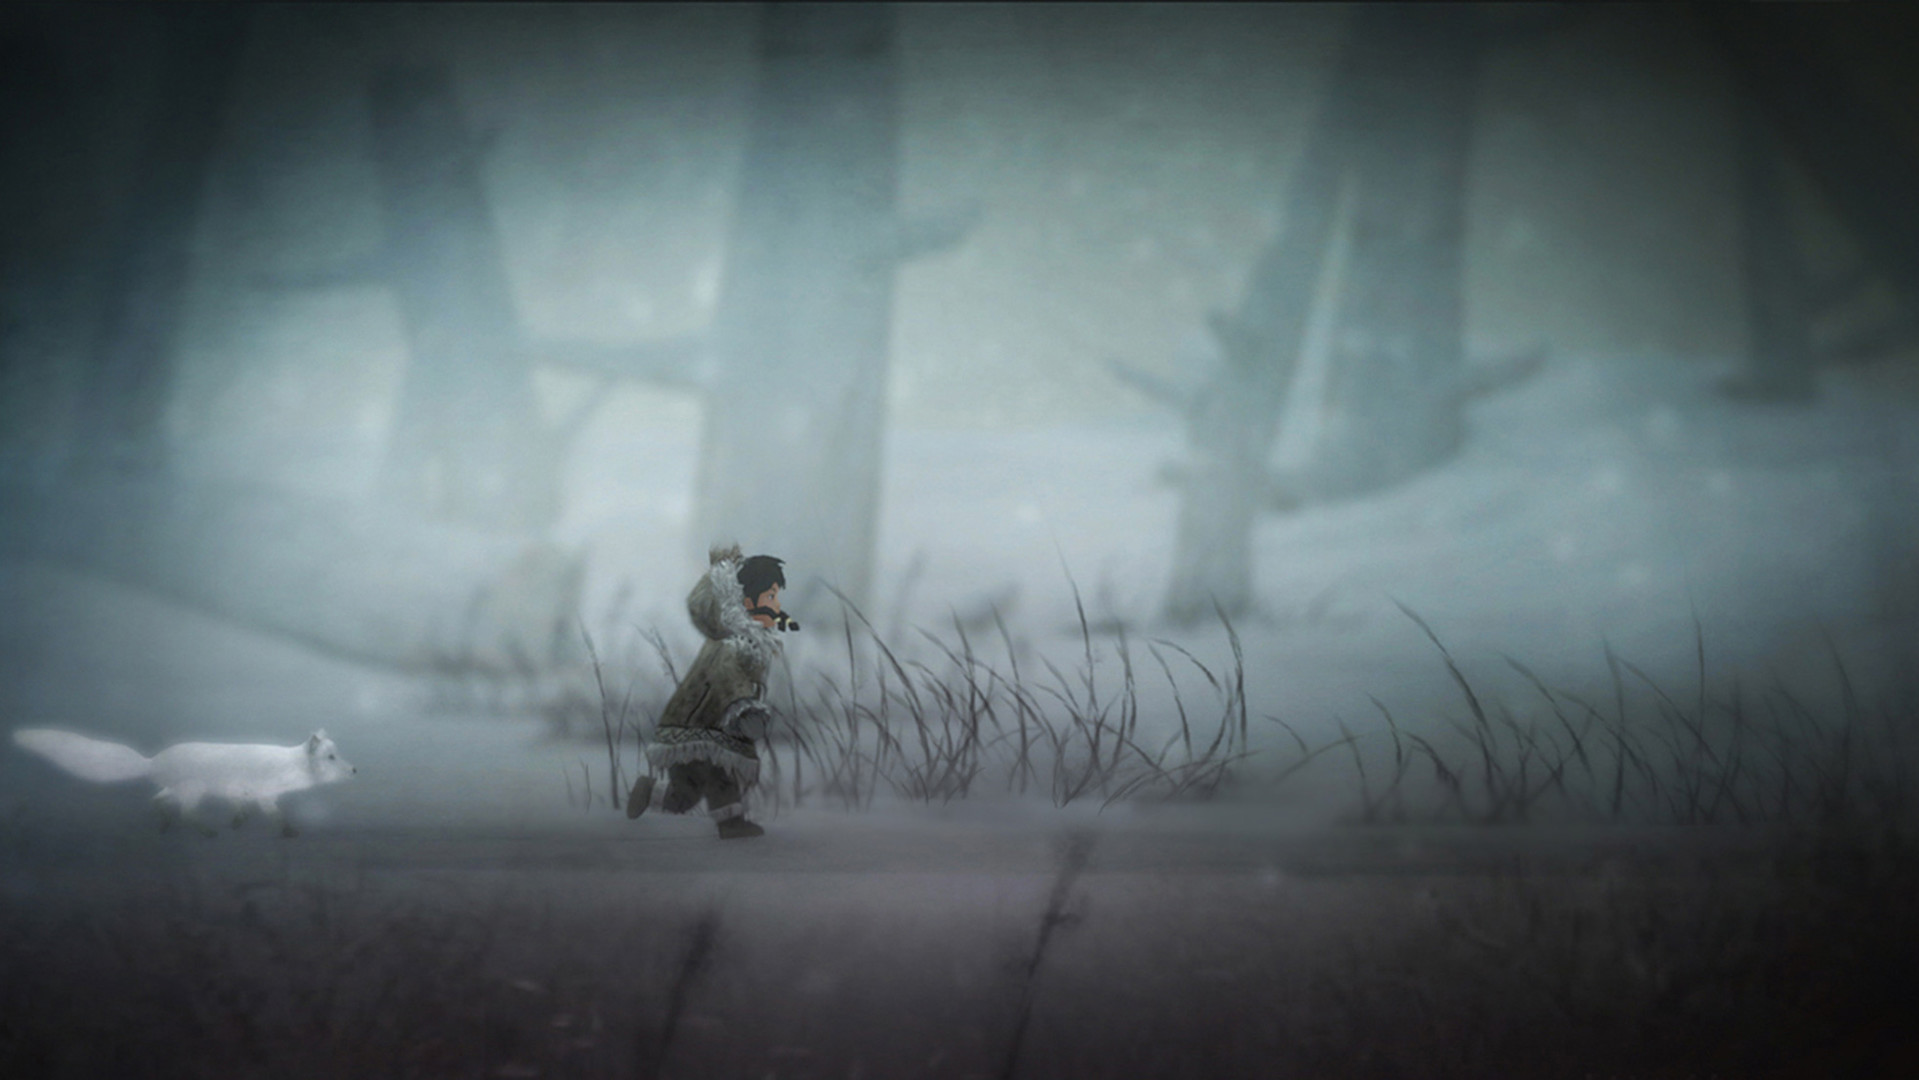 Скриншот *Never Alone - Arctic Collection [PS4] 5.05 / 6.72 / 7.02 [EUR] (2014) [Русский] (v1.04)*